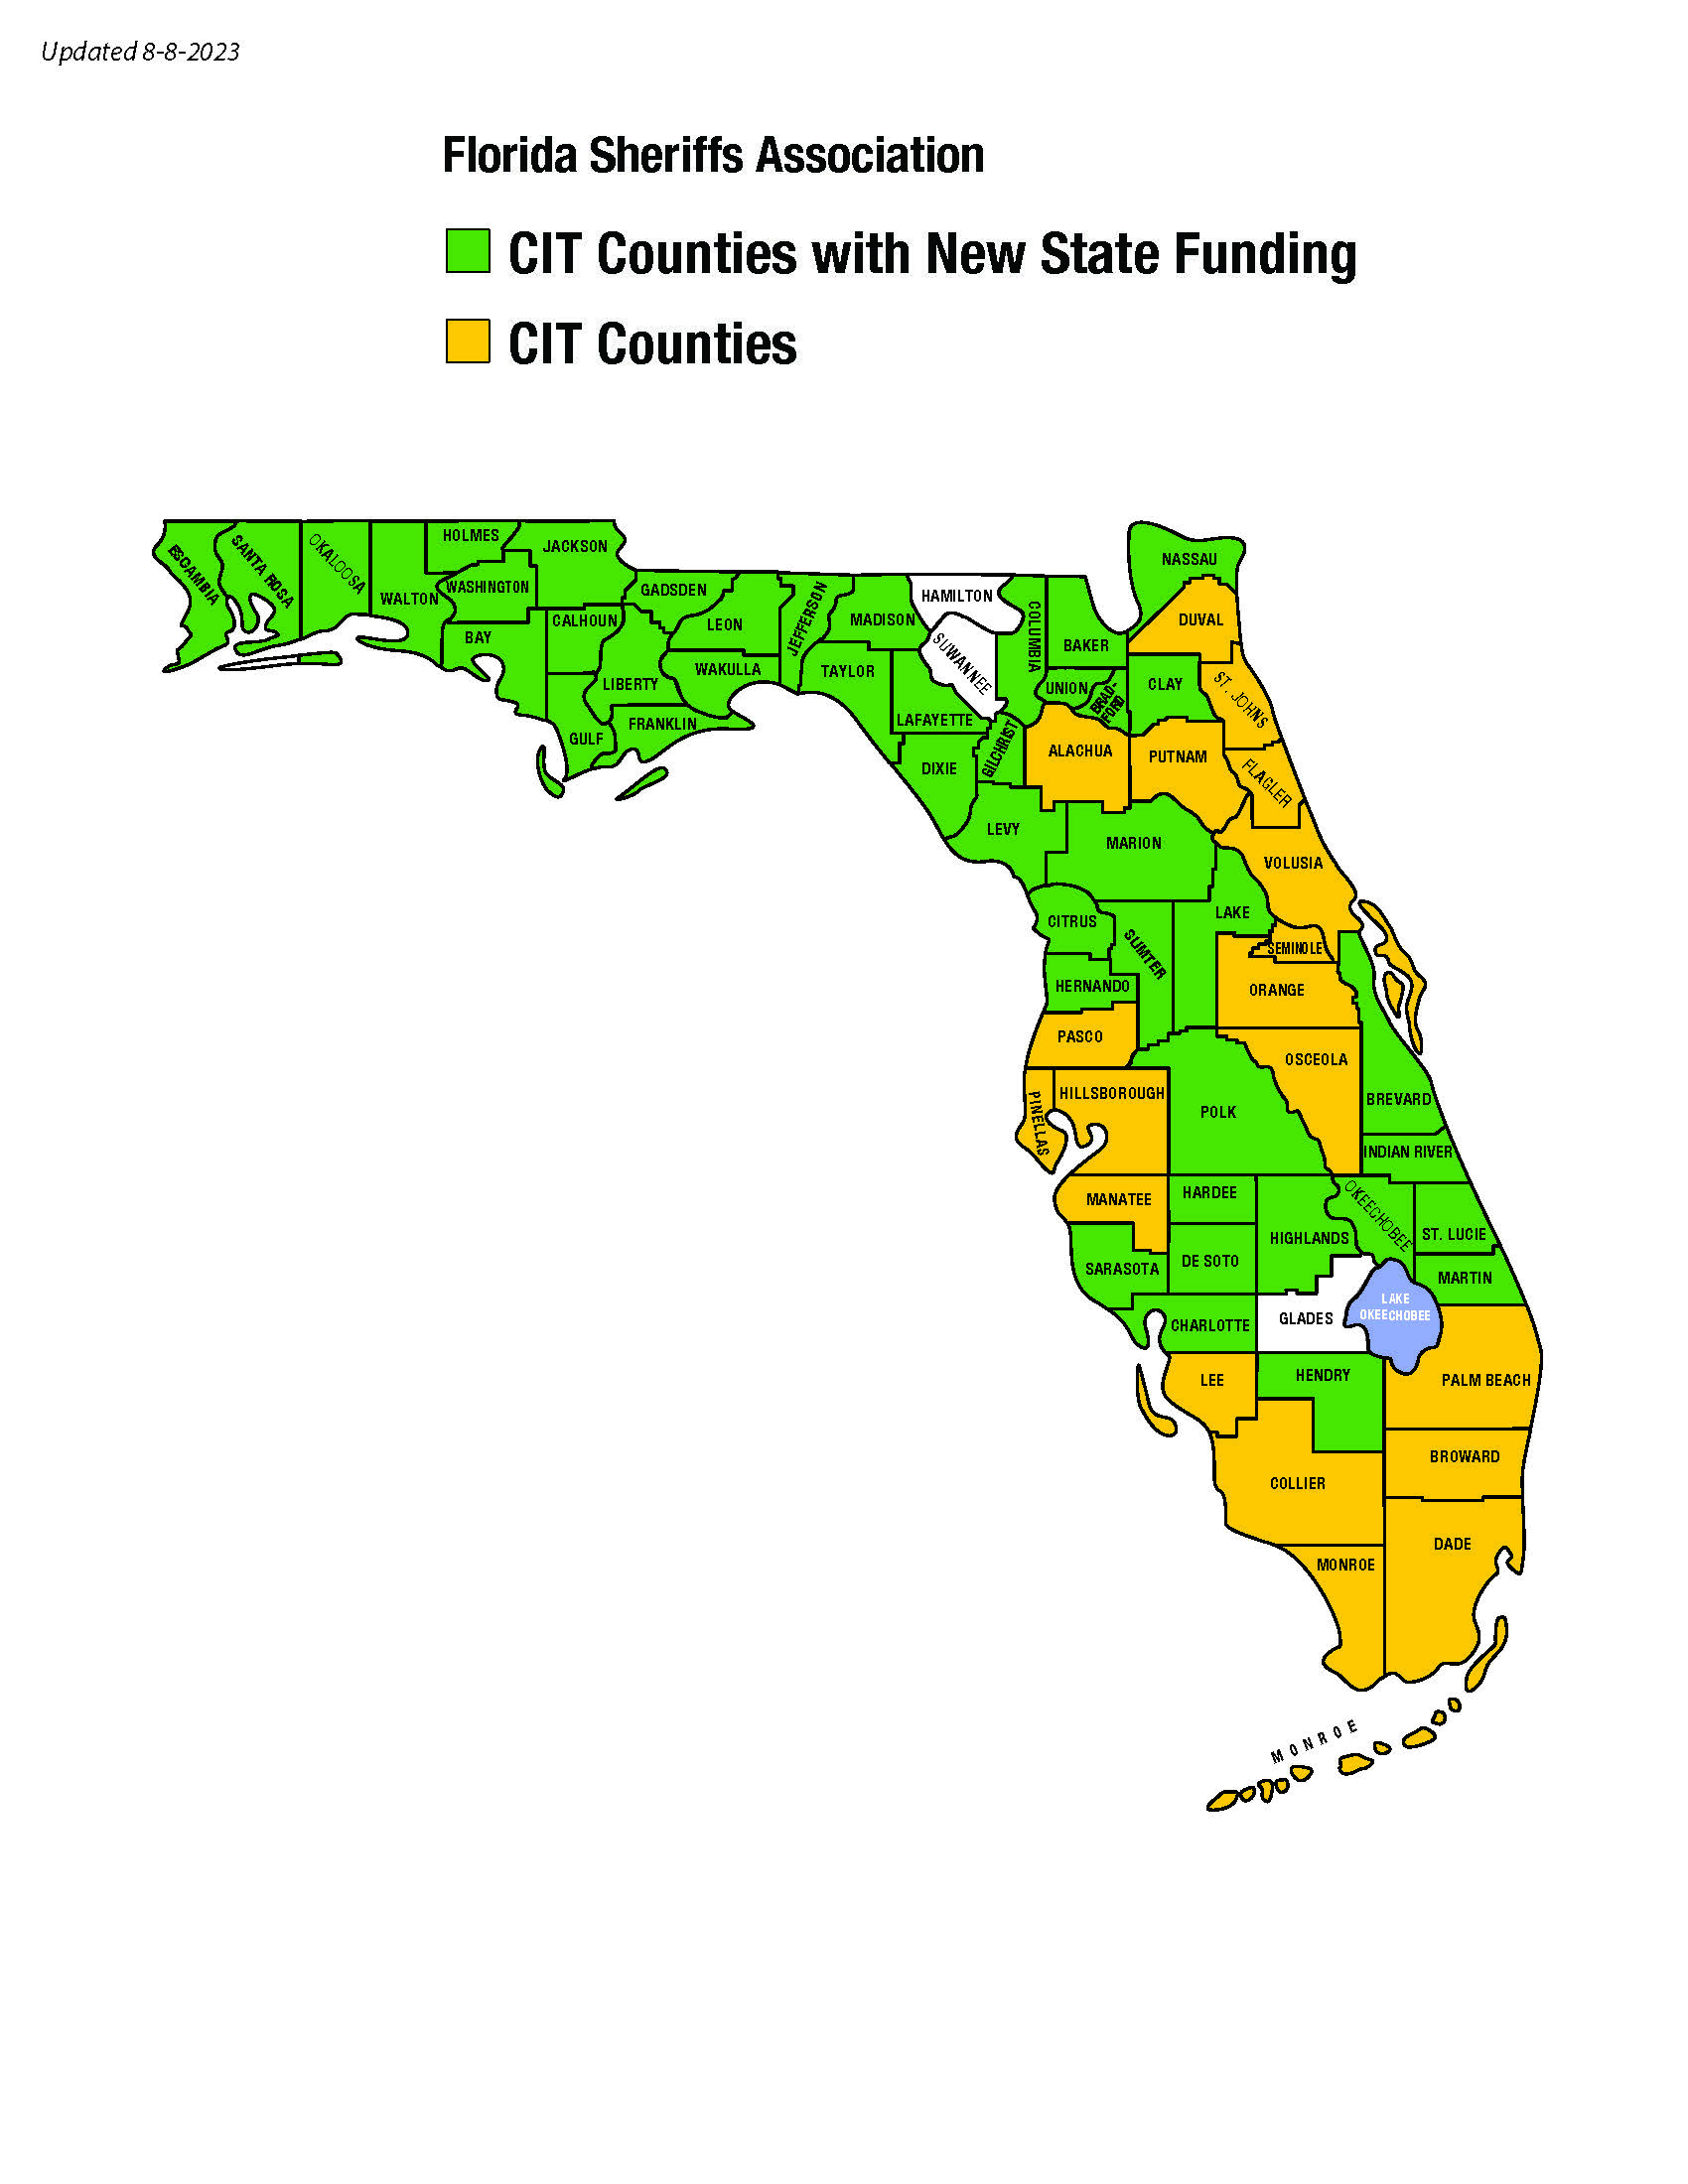 Color Map of Florida designation CIT Counties with New State Funding in green, and CIT Counties - 2014 in yellow